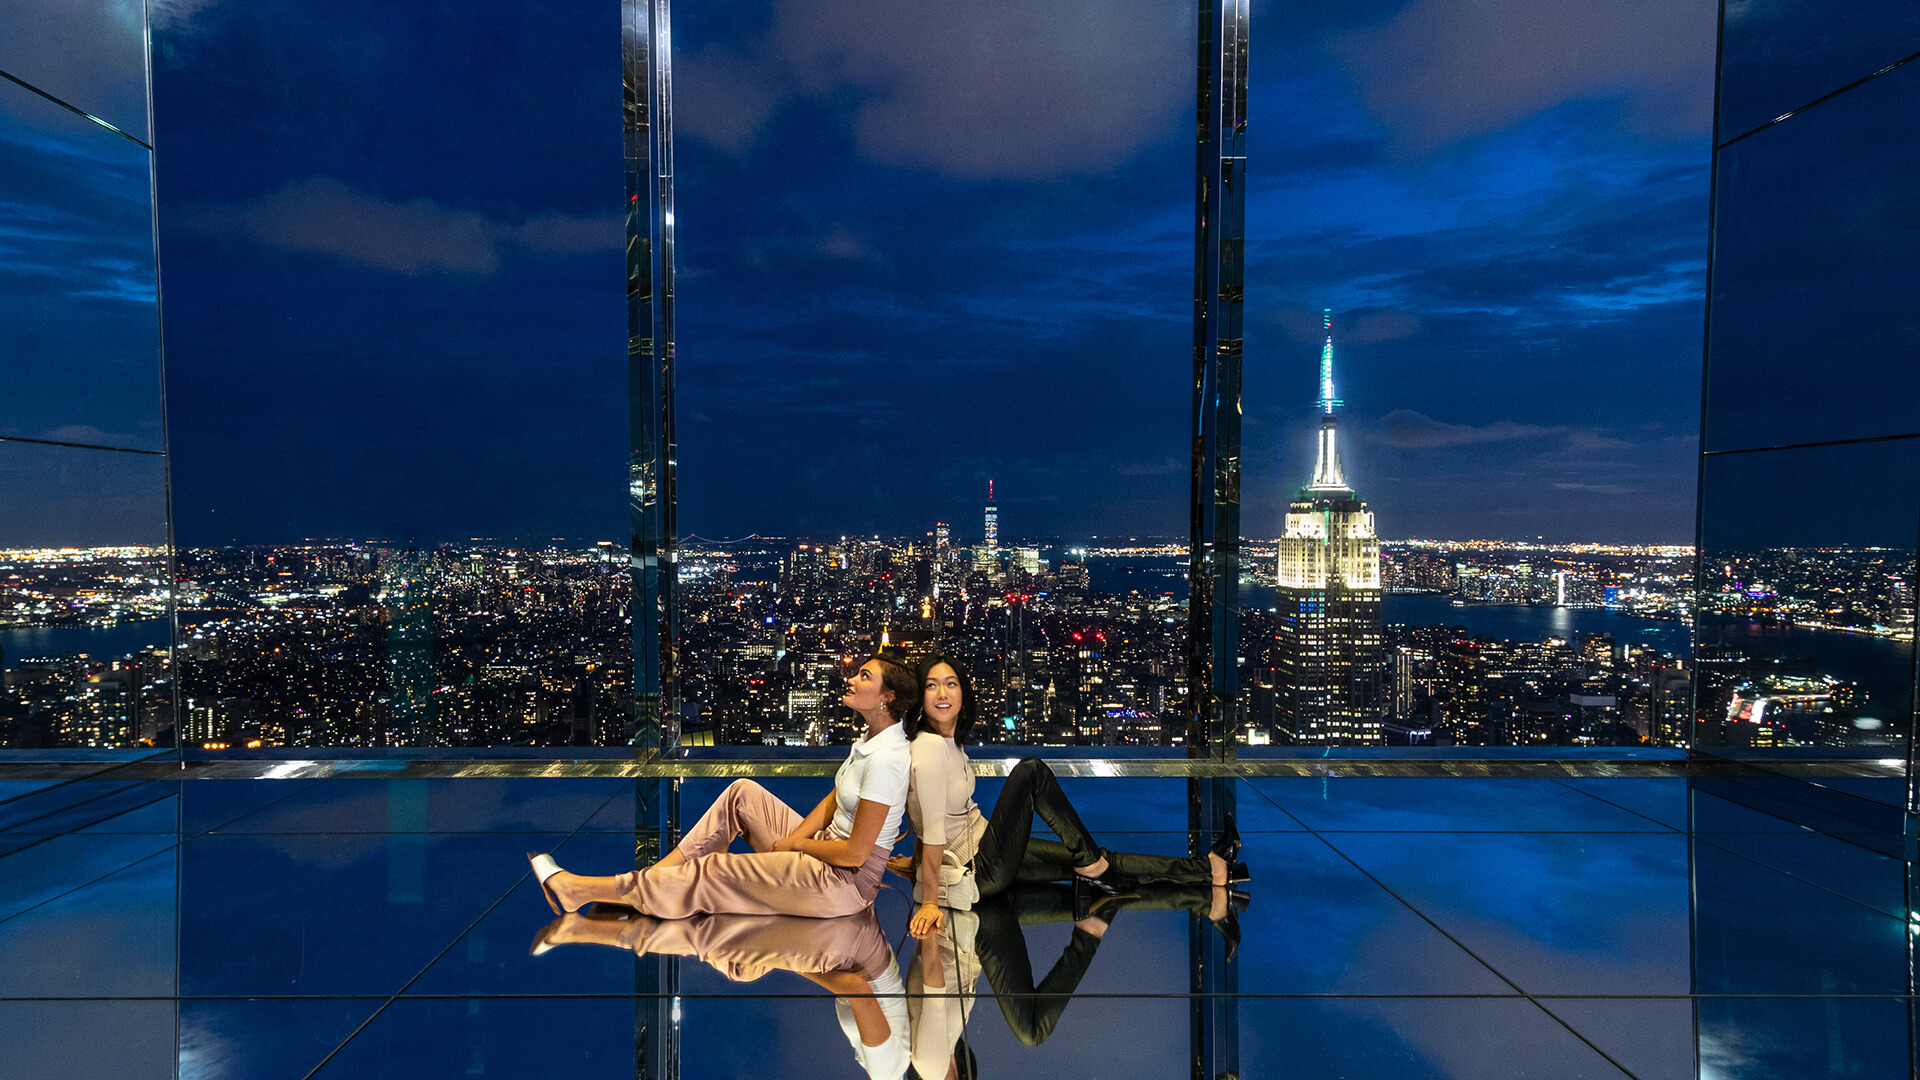 Two women, positioned back to back, absorbing the view of New York at night.